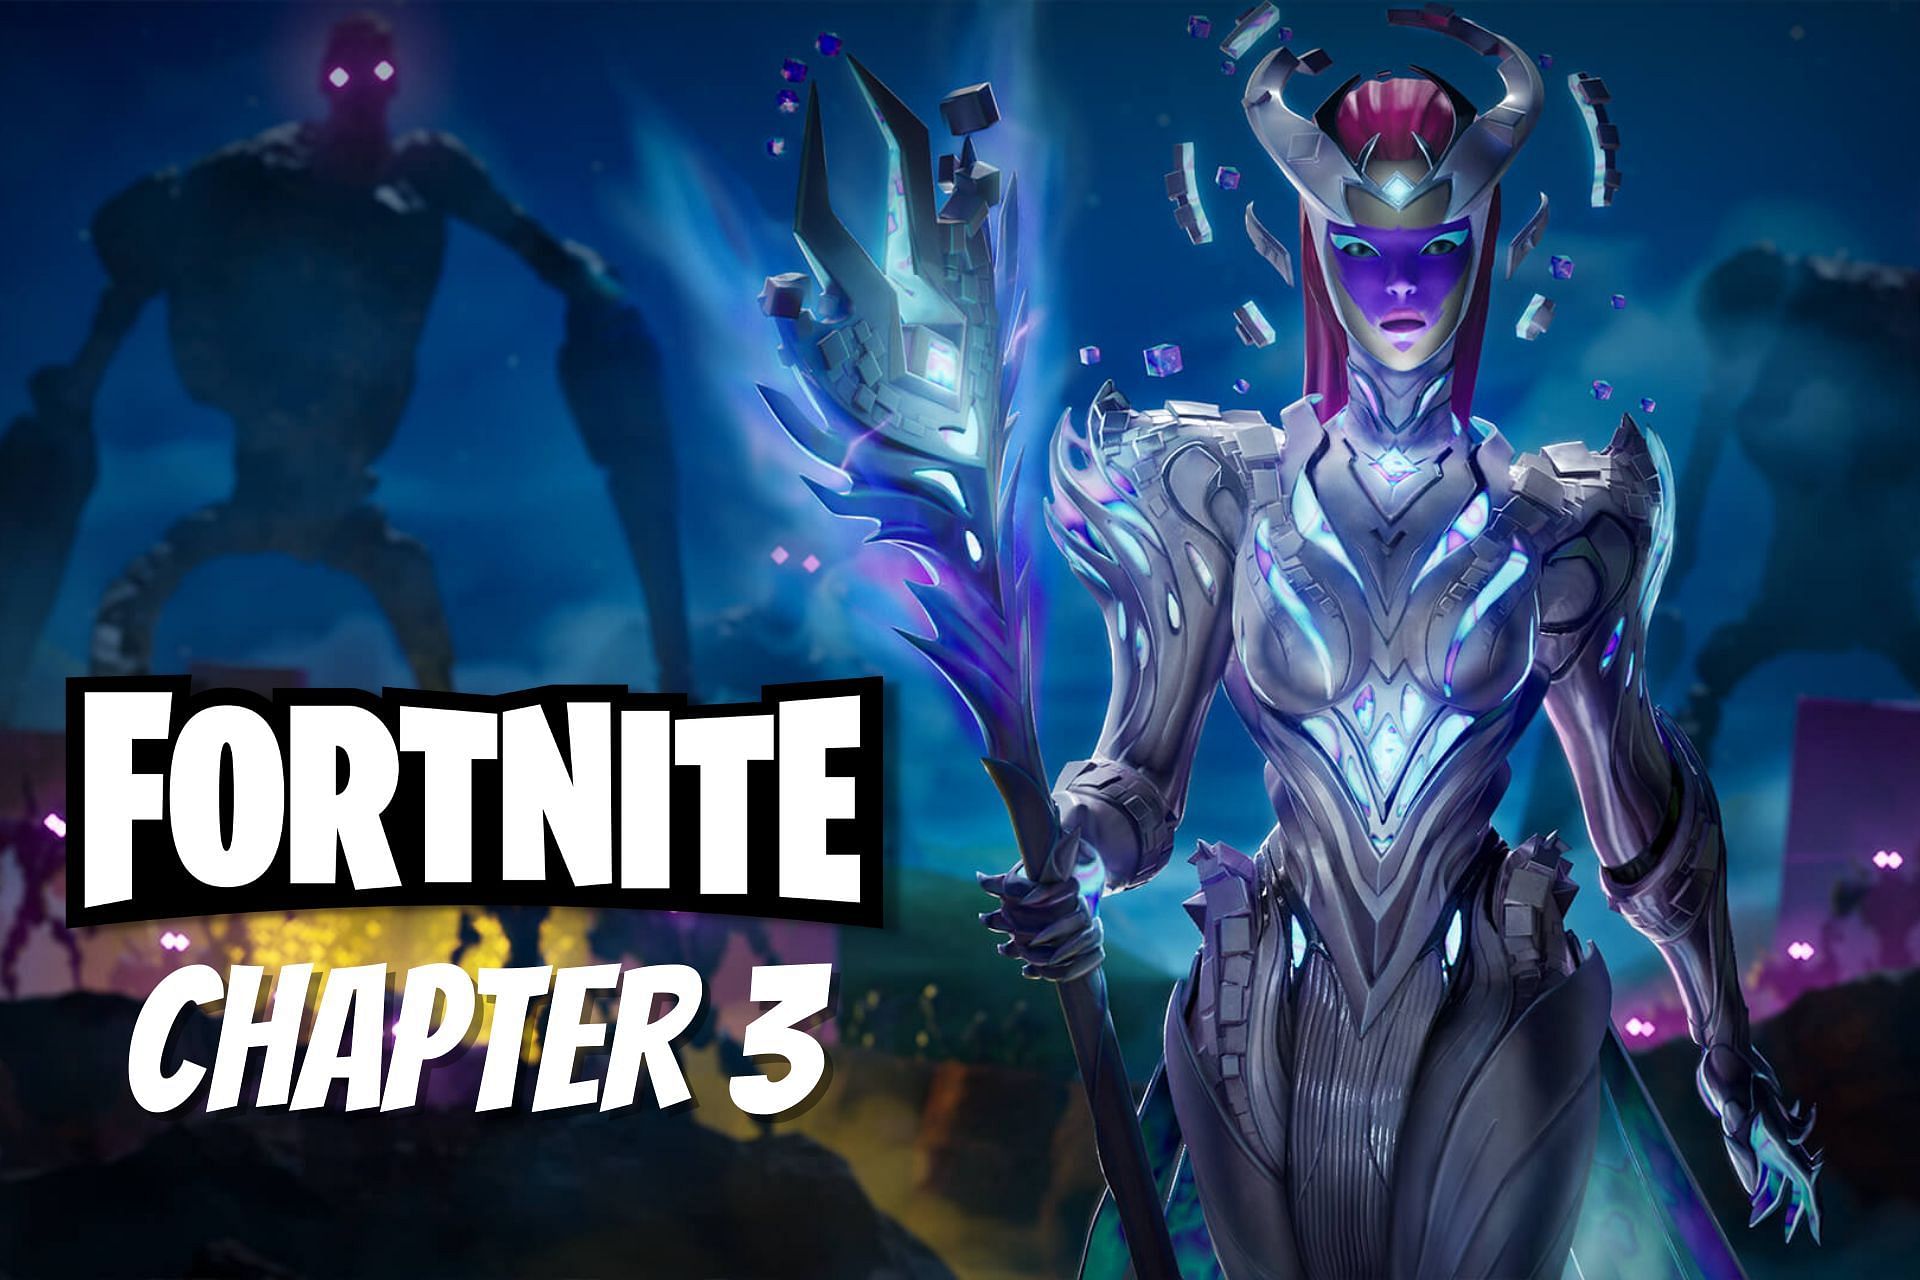 Cube Queen to introduce Fortnite Chapter 3 (Image via Sportskeeda)